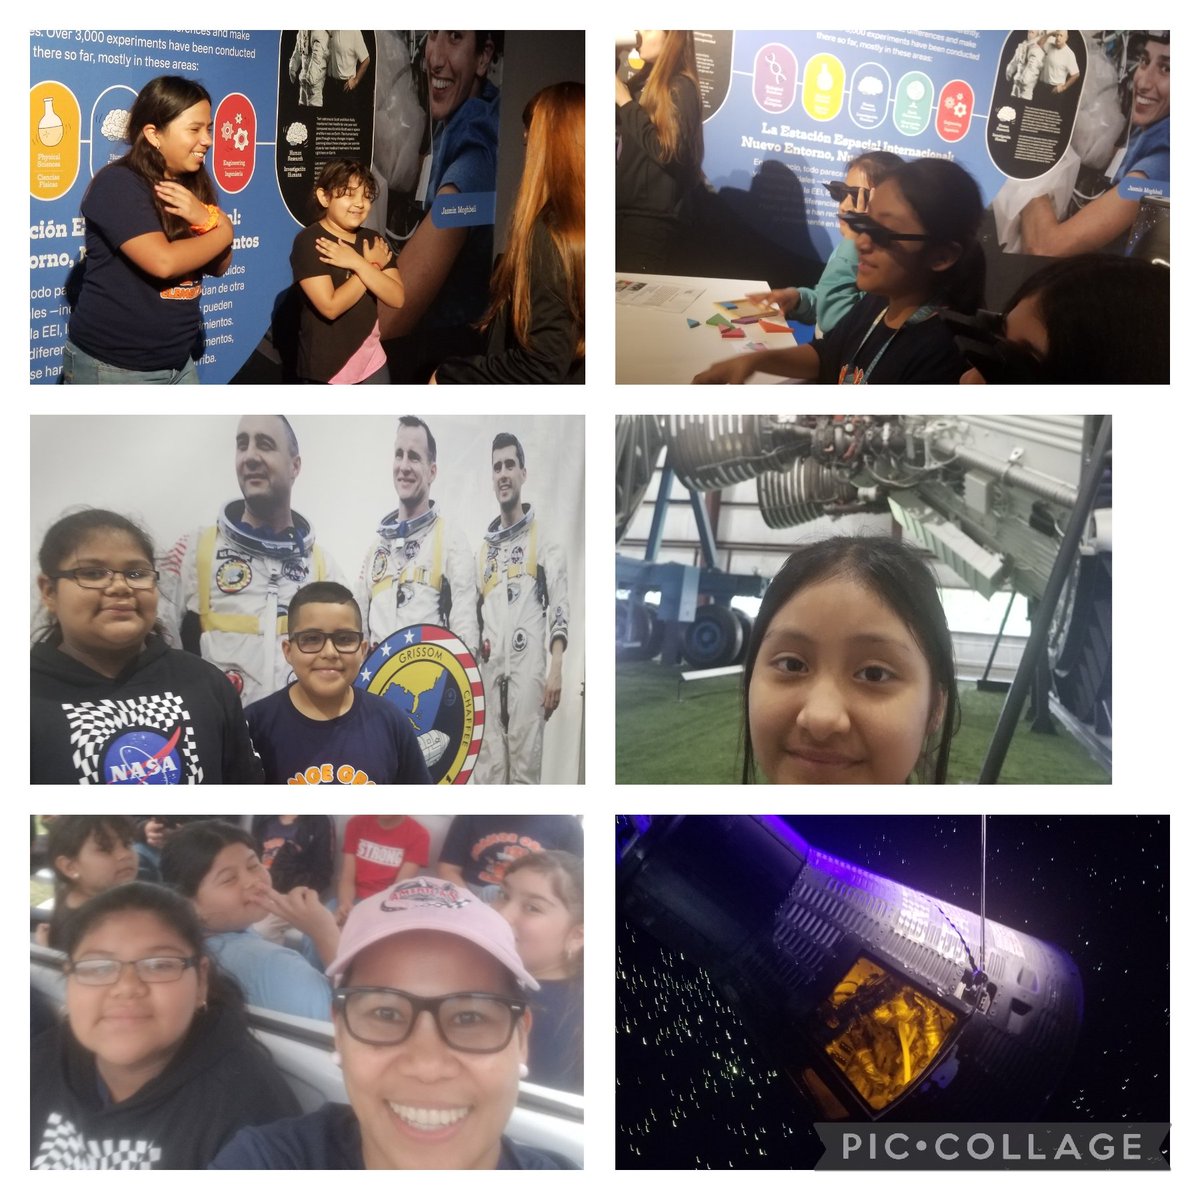 Trip to NASA! What a priceless moment seeing students excited, most for the 1st time! Glad we were able to do the Tram Tour before it poured. Grateful @AldineISD for opportunities like this.Thankful to @Jldiaz_1 for allowing us, IS's to join😍😊 @LeticiaTeach @OrangeGroveAISD